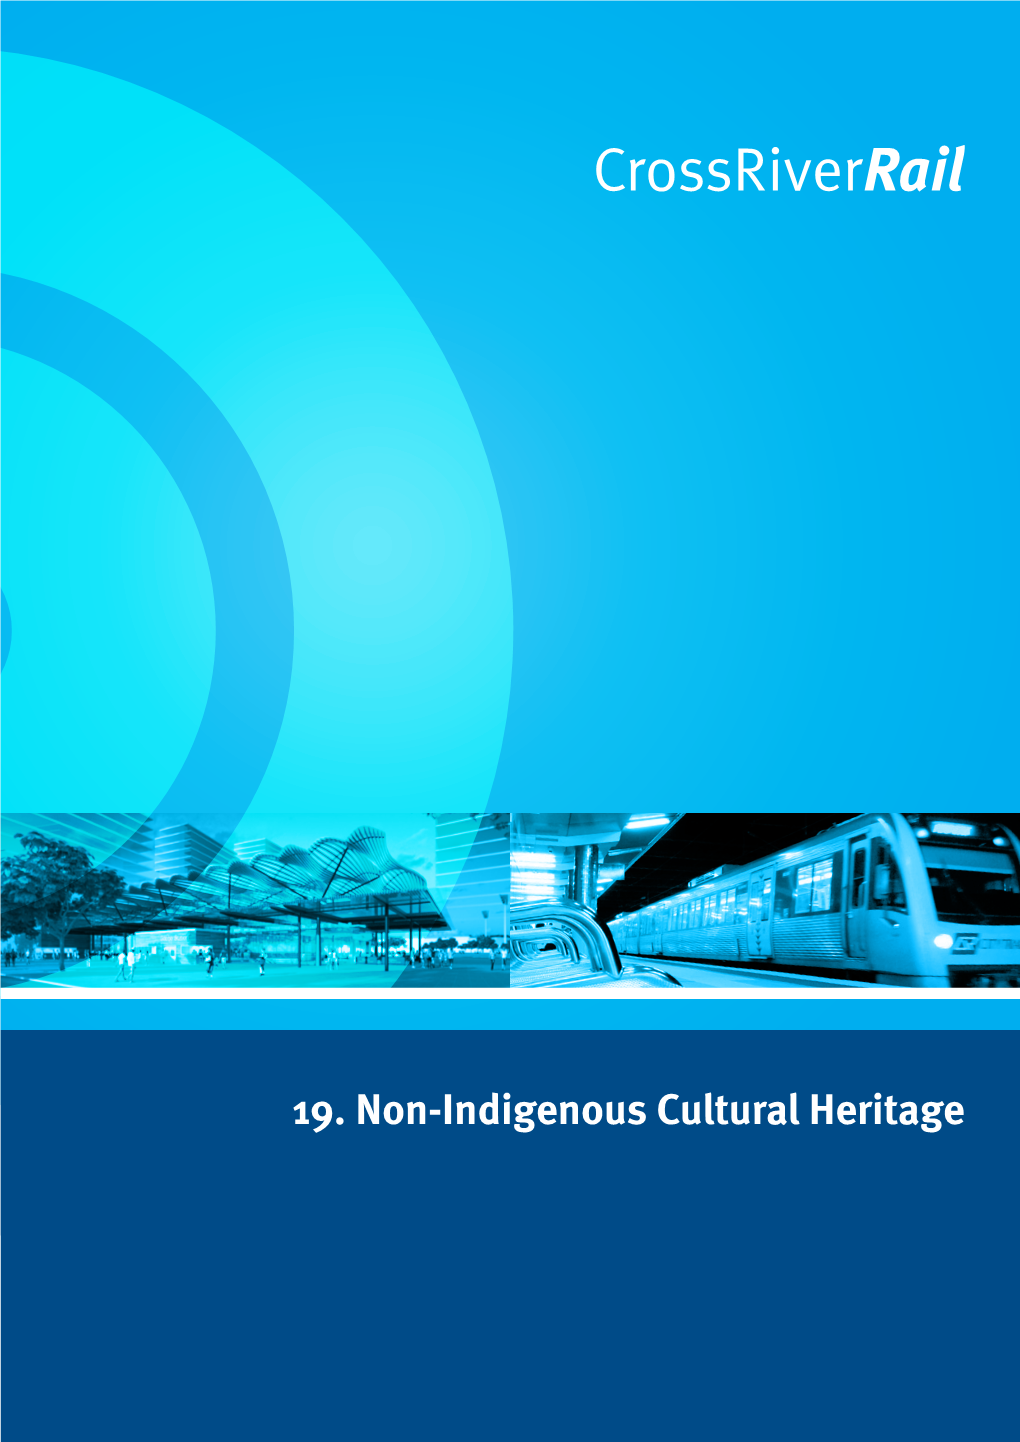 19. Non-Indigenous Cultural Heritage